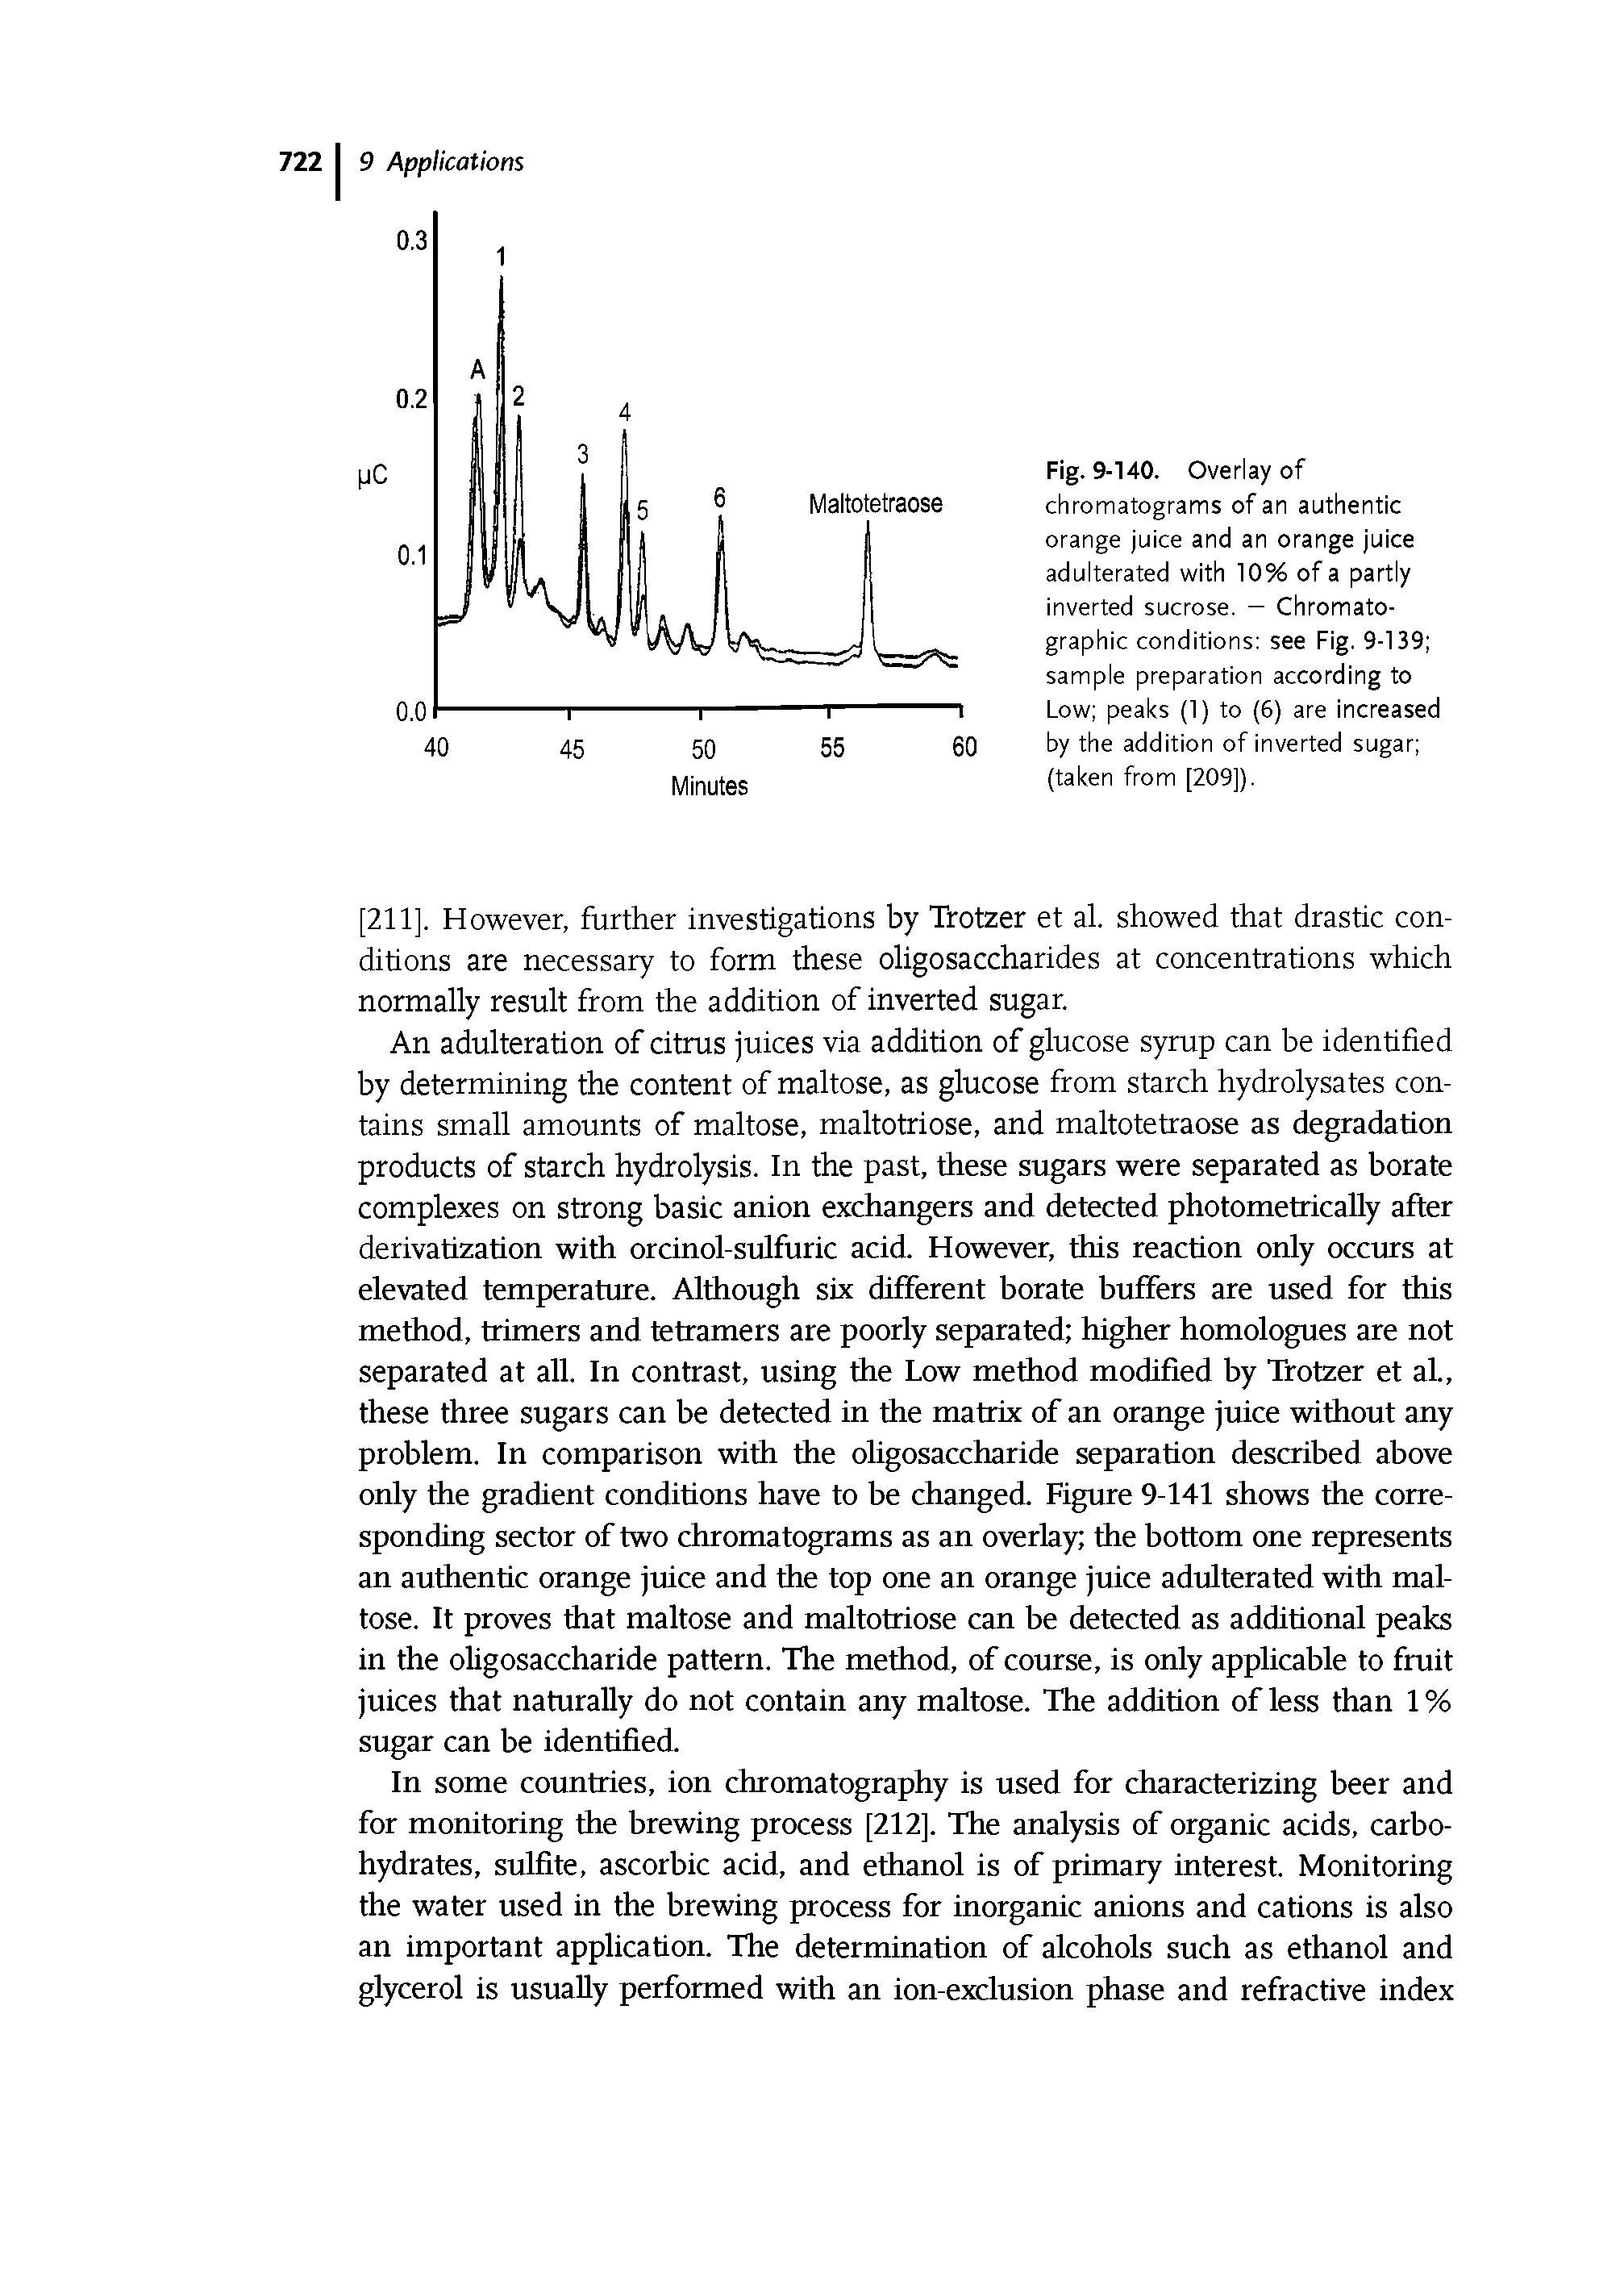 Fig. 9-140. Overlay of chromatograms of an authentic orange juice and an orange juice adulterated with 10% of a partly inverted sucrose. — Chromatographic conditions see Fig. 9-139 sample preparation according to Low peaks (1) to (6) are increased by the addition of inverted sugar (taken from [209]).